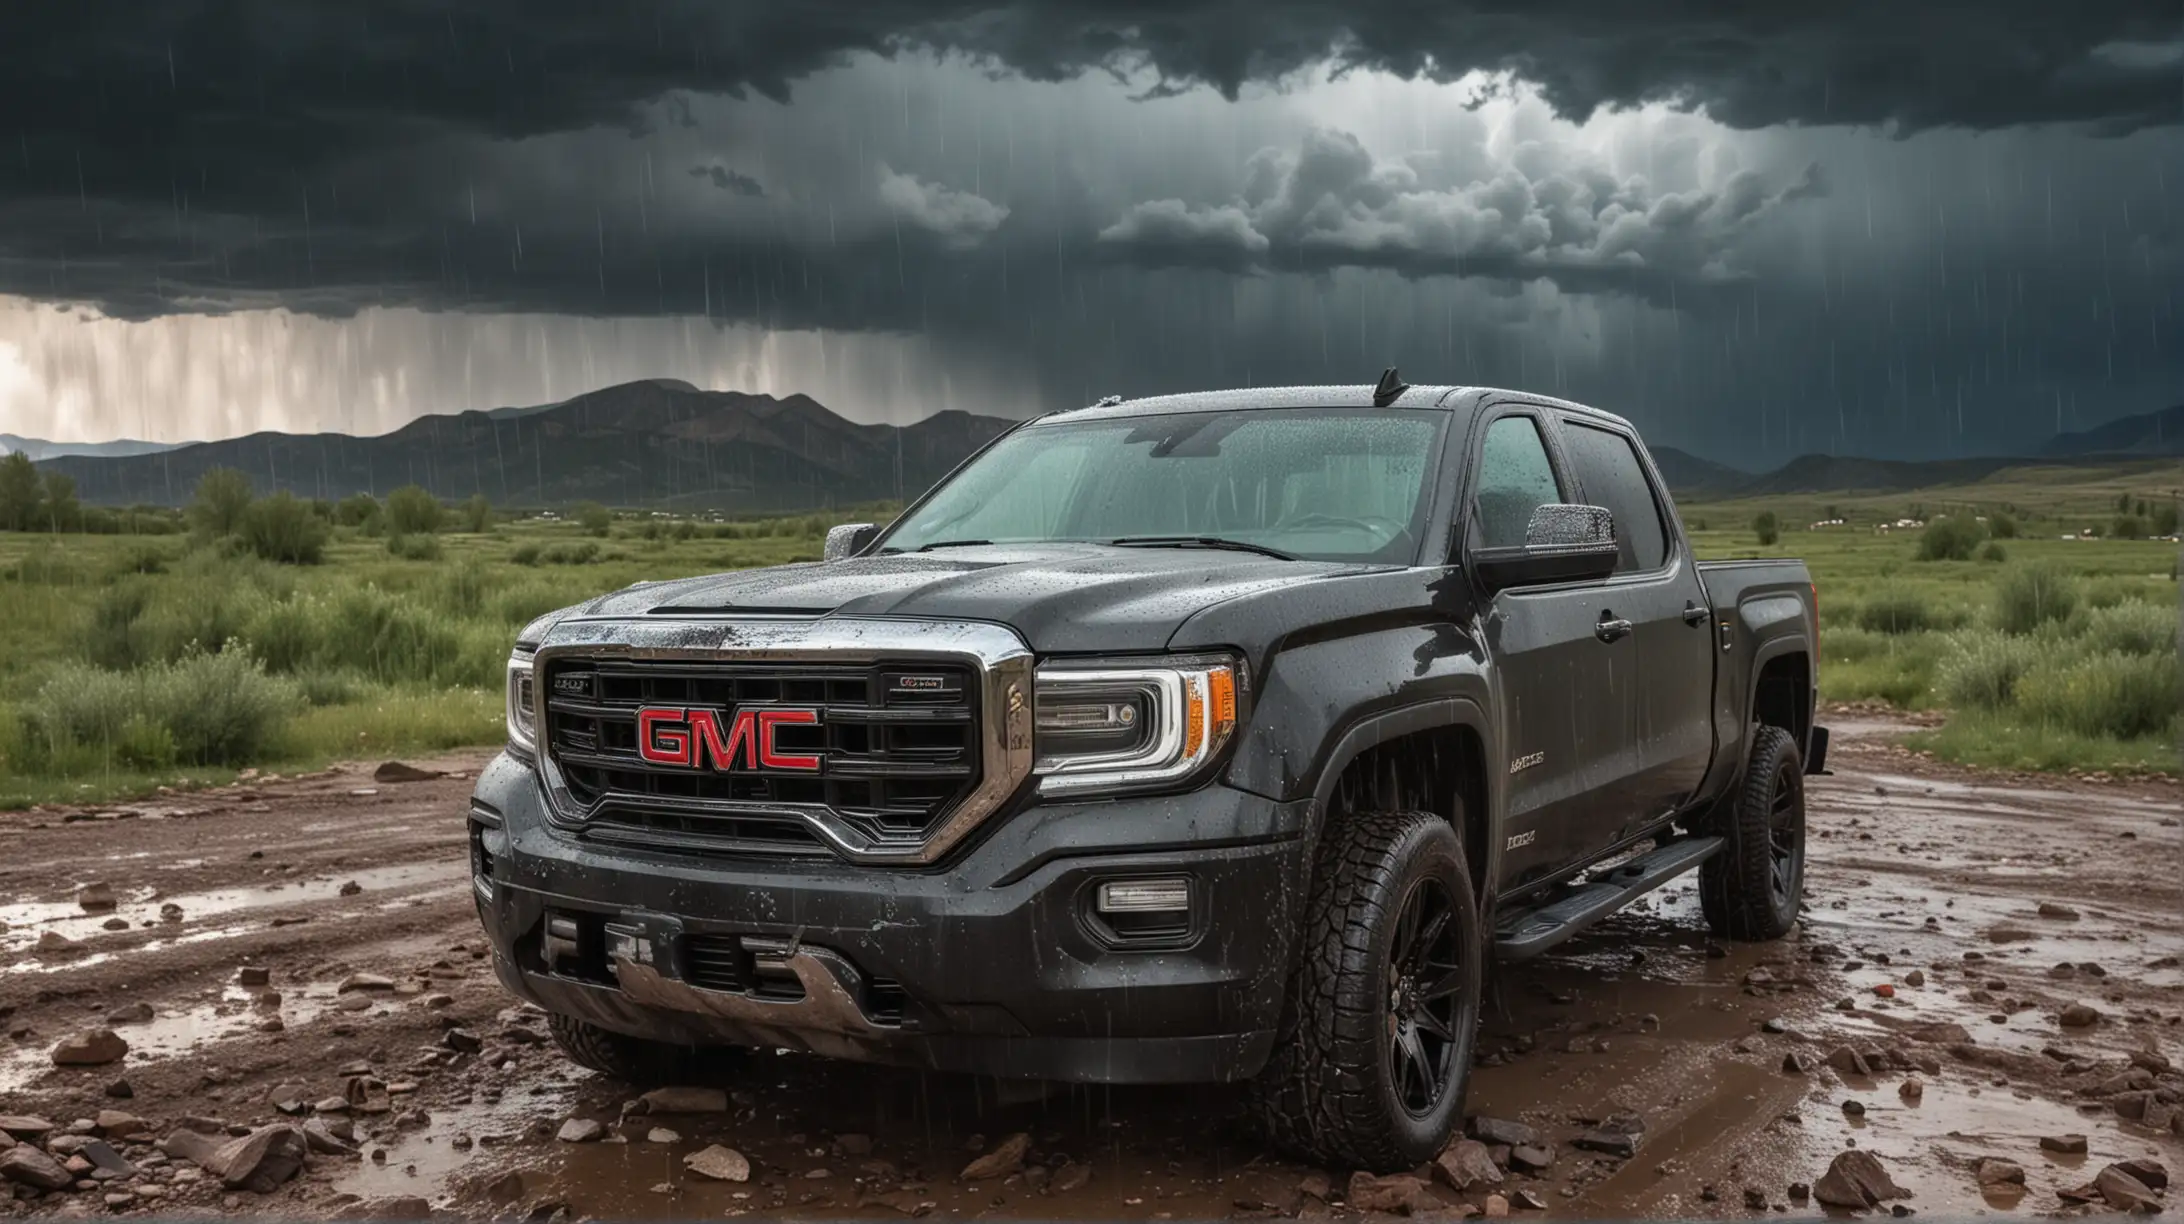 GMC Sierra Truck Damaged by Hail Storm in Colorado Mountains